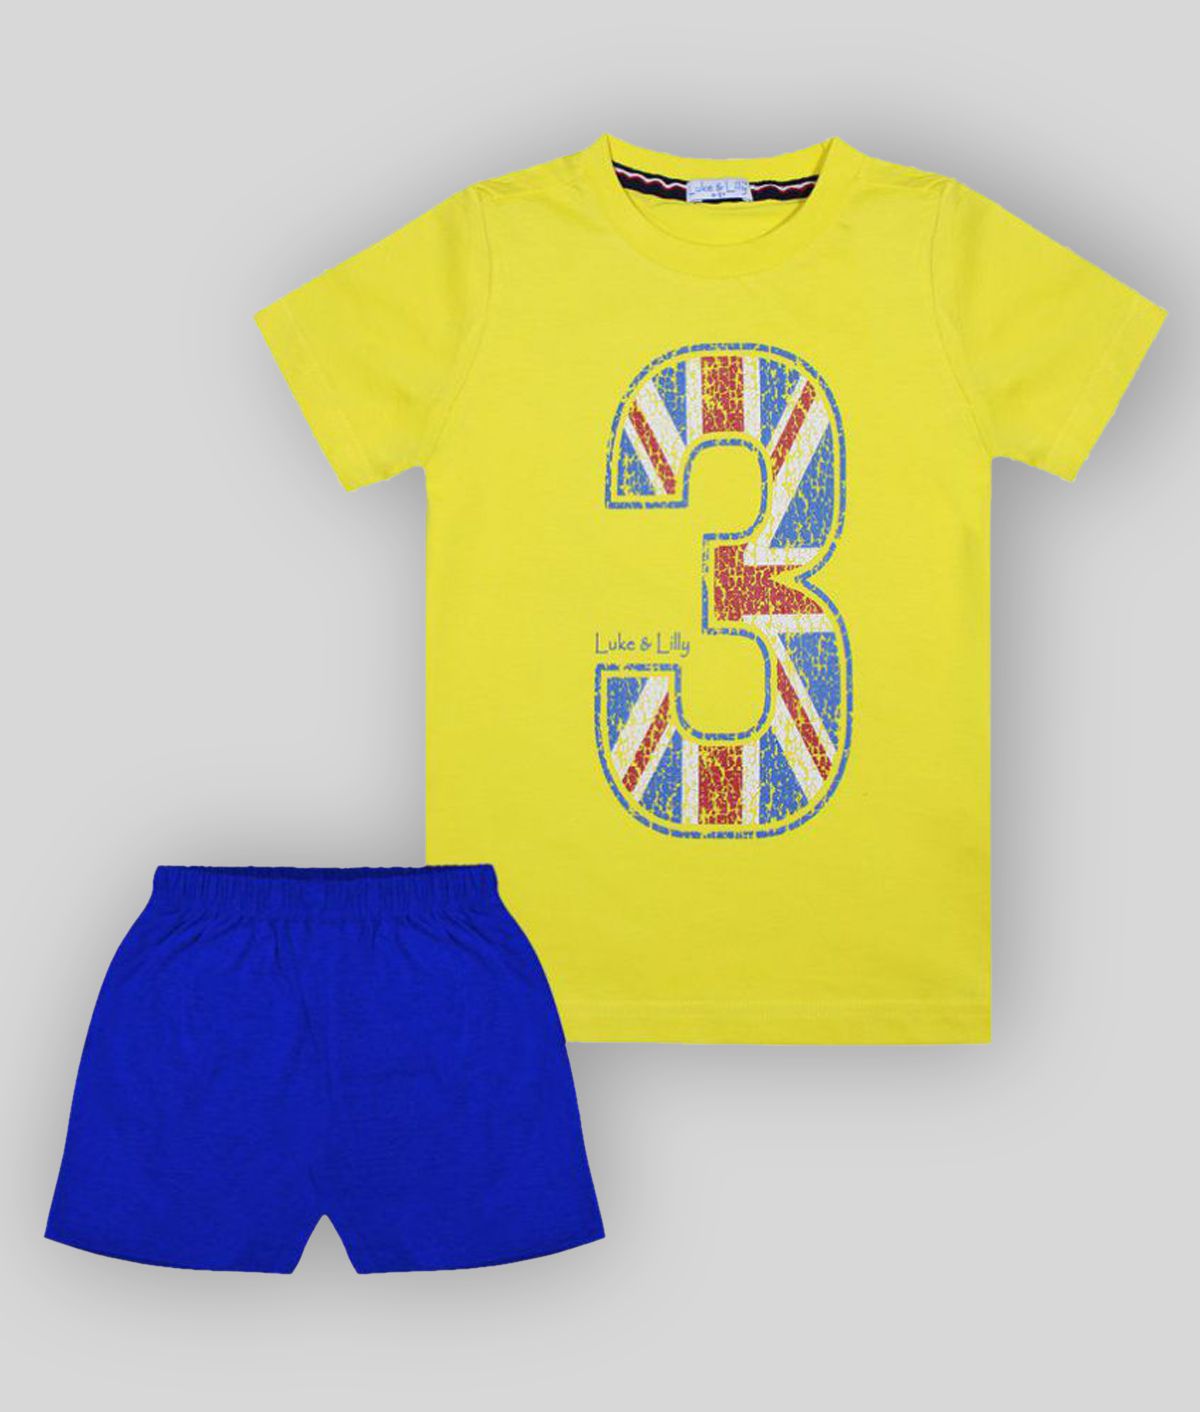     			Luke and Lilly - Multi Cotton Boys T-Shirt & Shorts ( Pack of 1 )